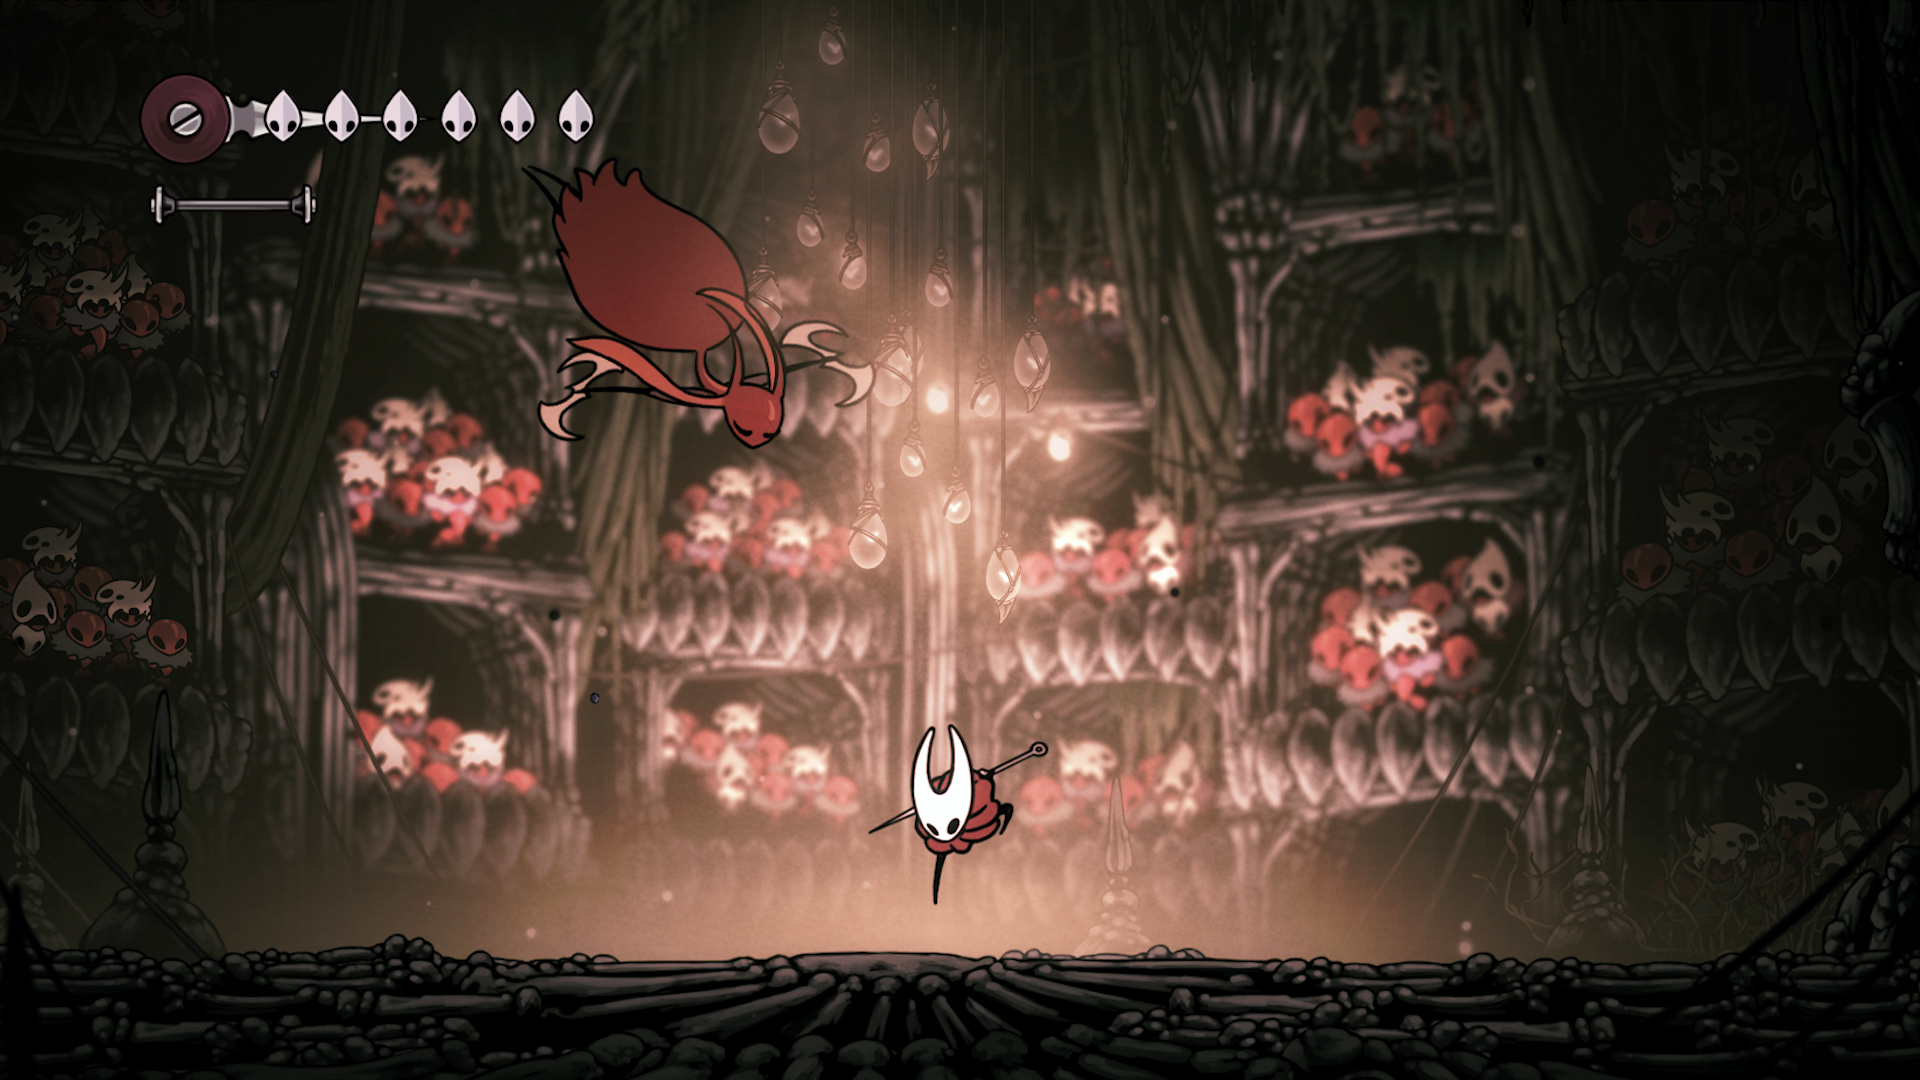 download hollow knight silksong release date